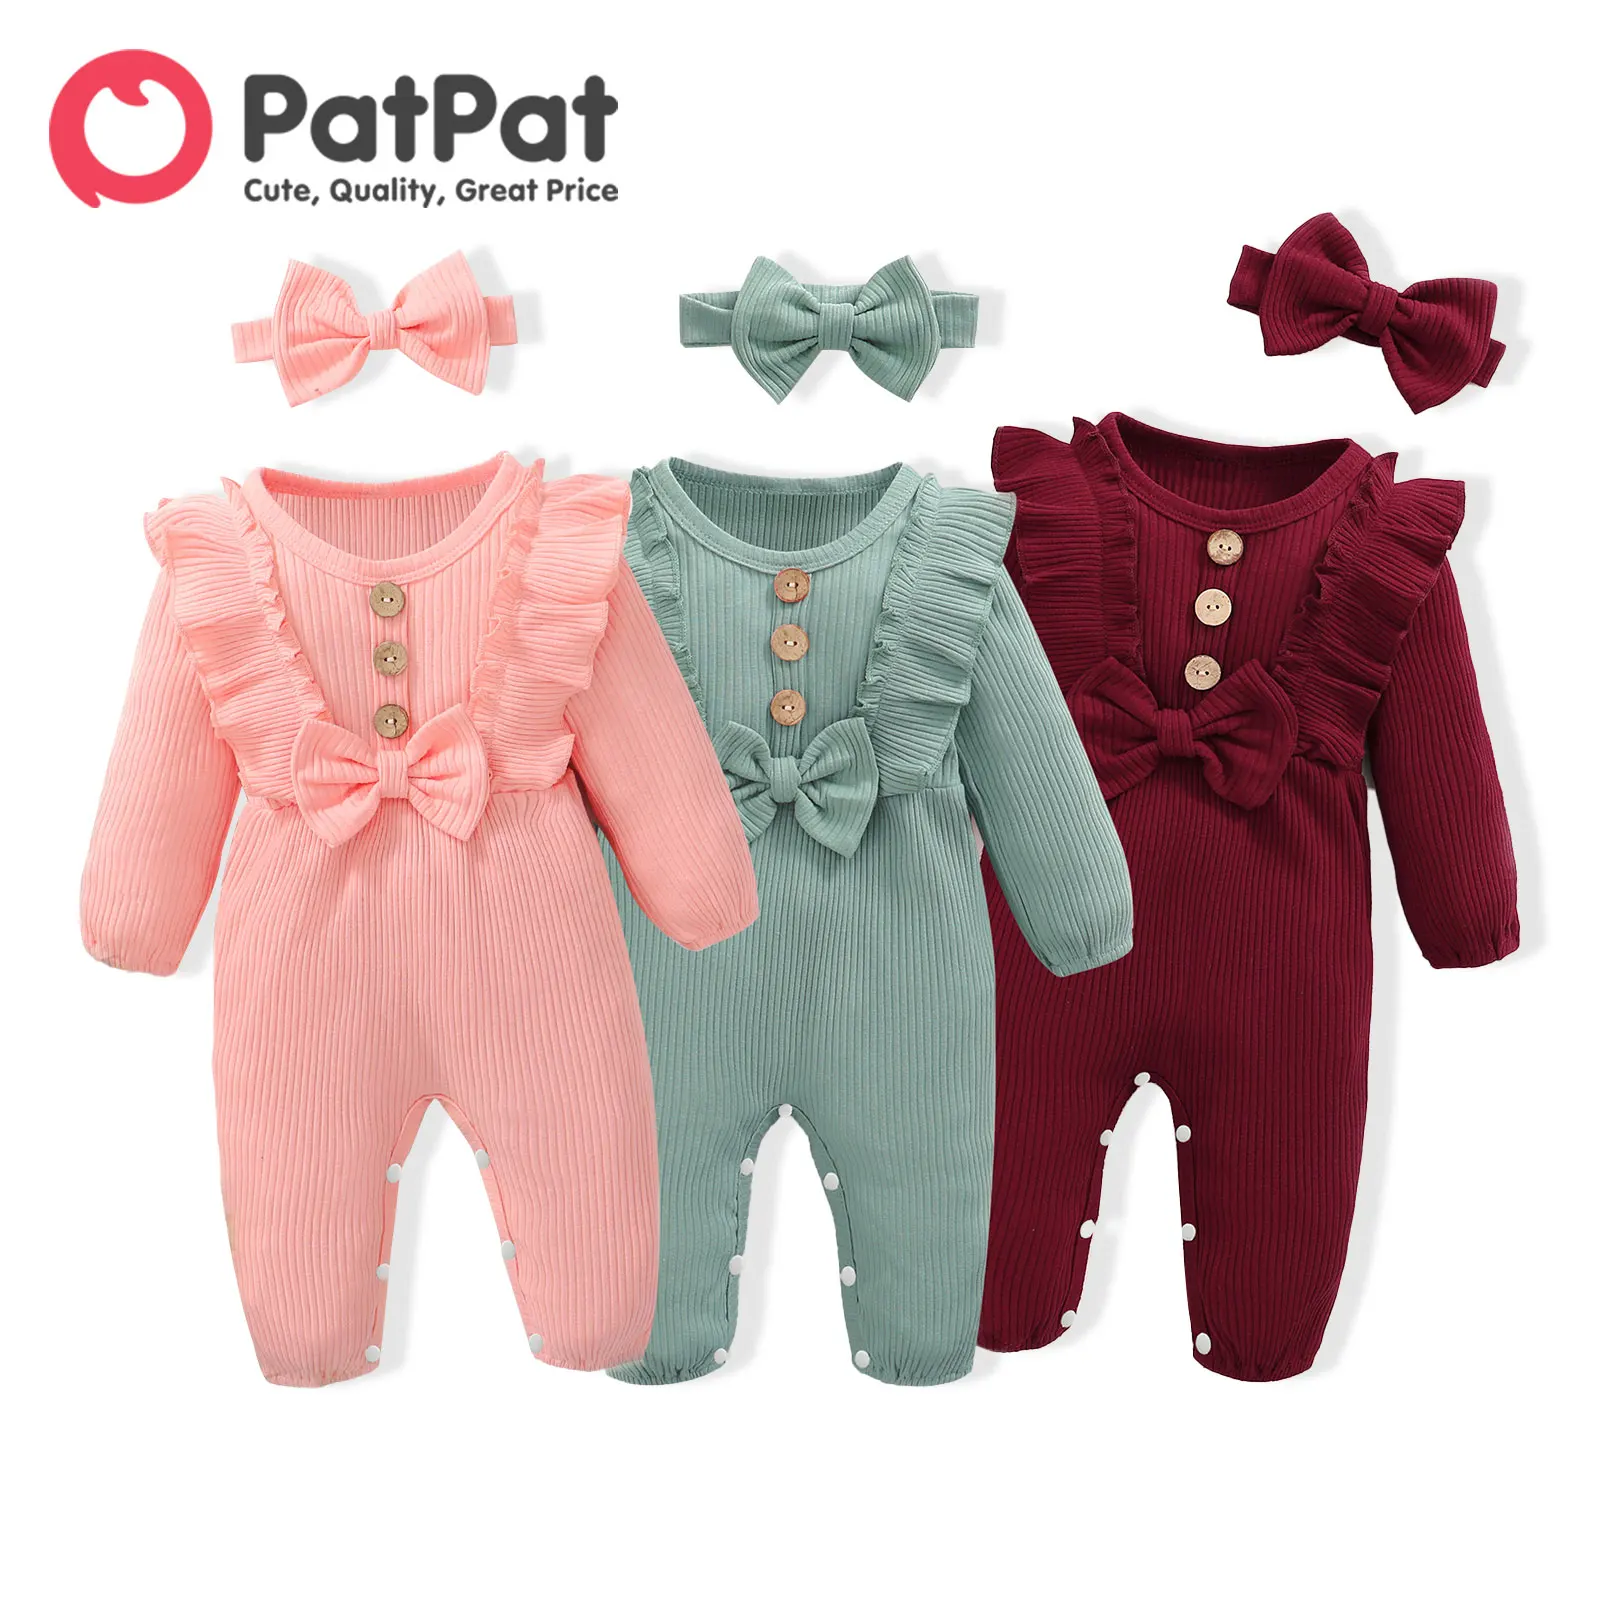 

PatPat Baby Girl Clothes 2pcs Infant Newborn Romper Casual 95% Cotton Ribbed Long-sleeve Bowknot Button Jumpsuit Headband Set